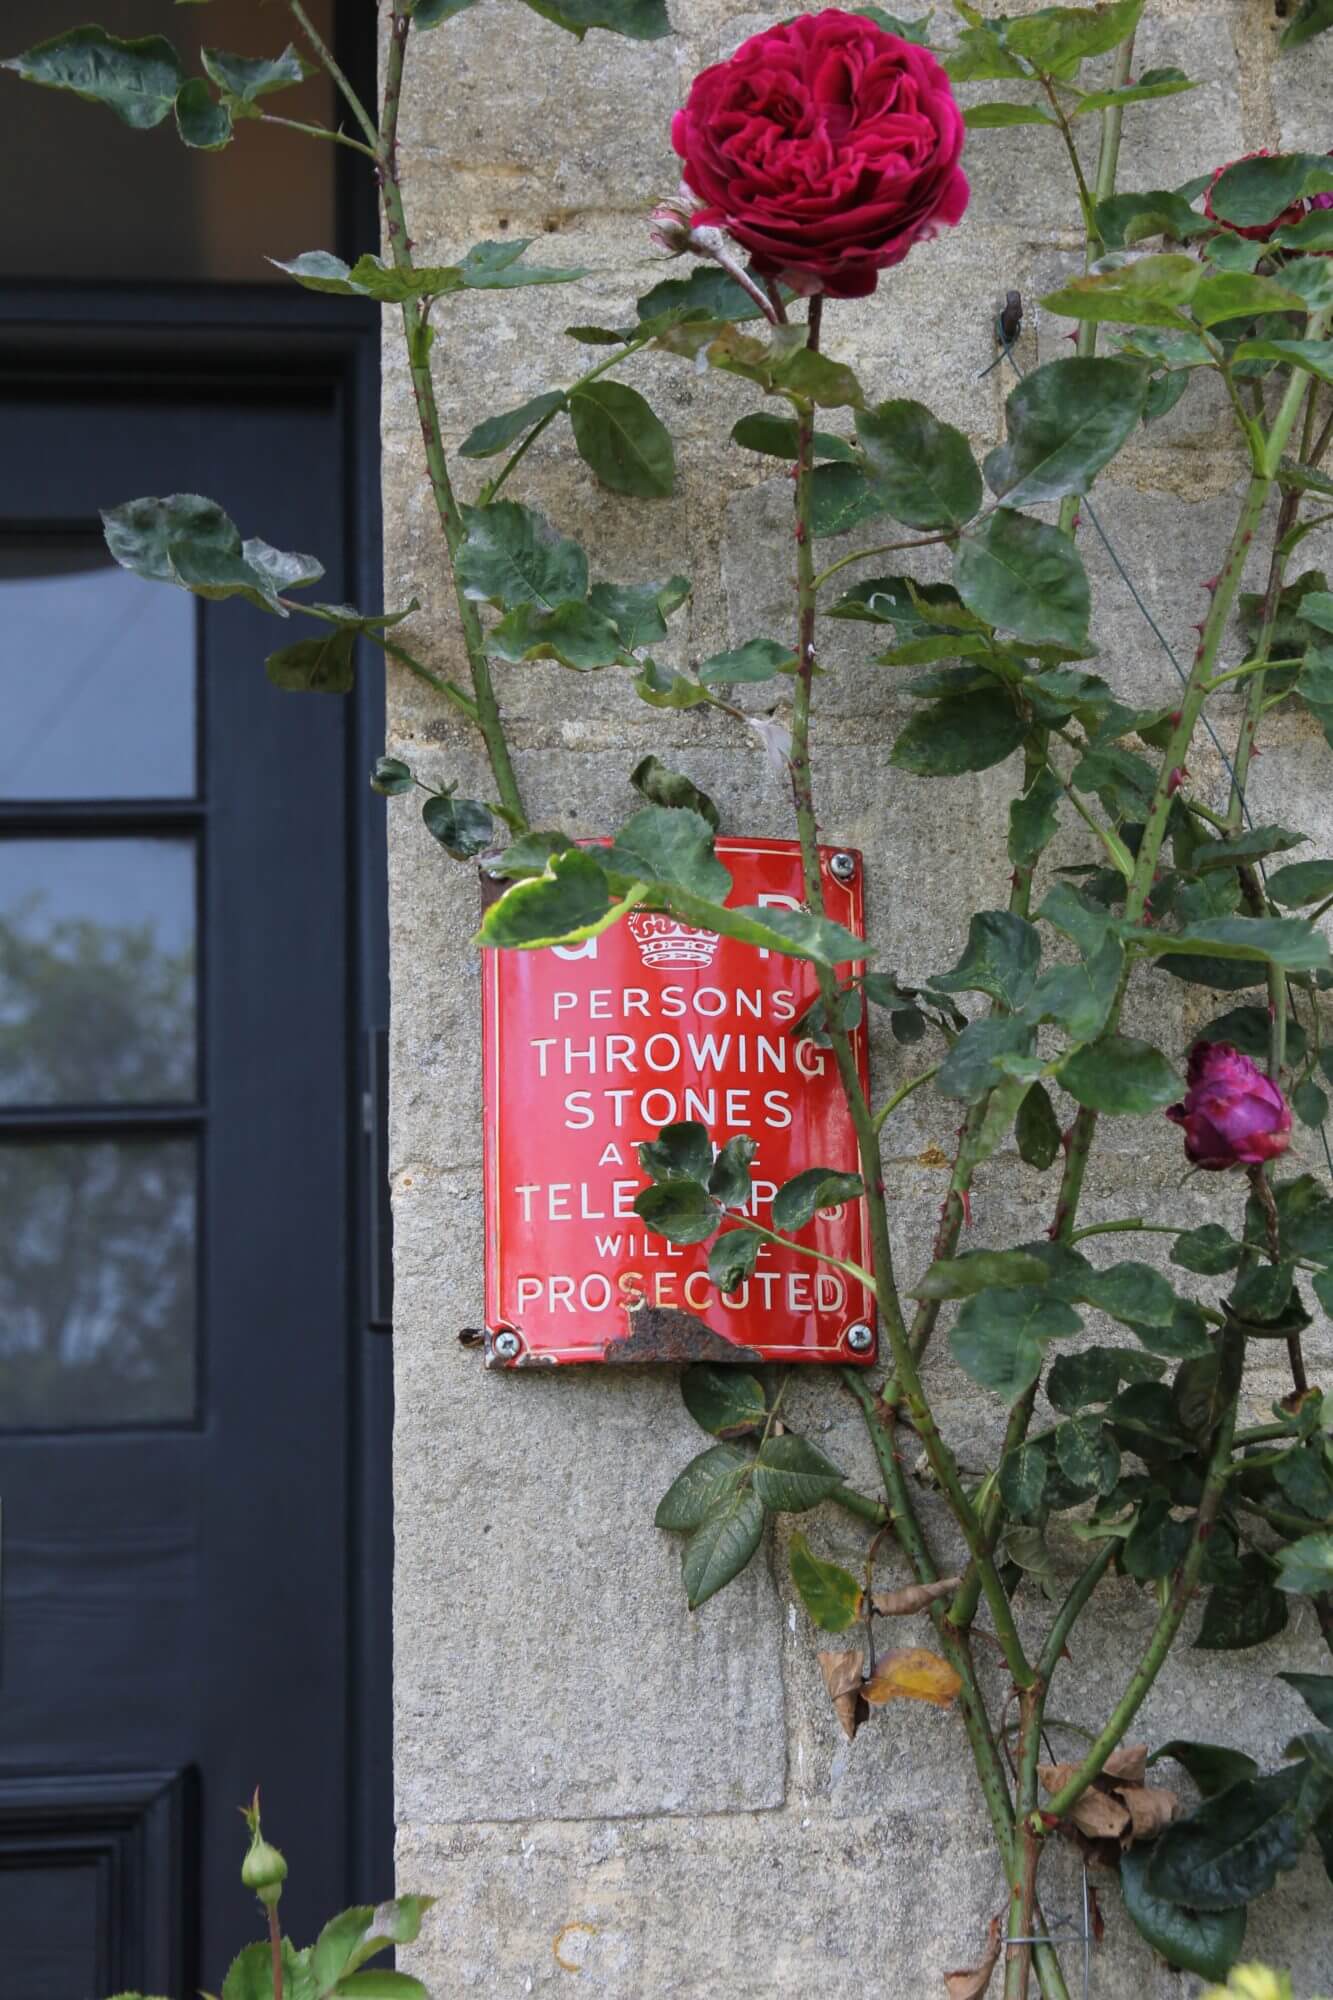 Vintage sign by front door next to climbing red rose